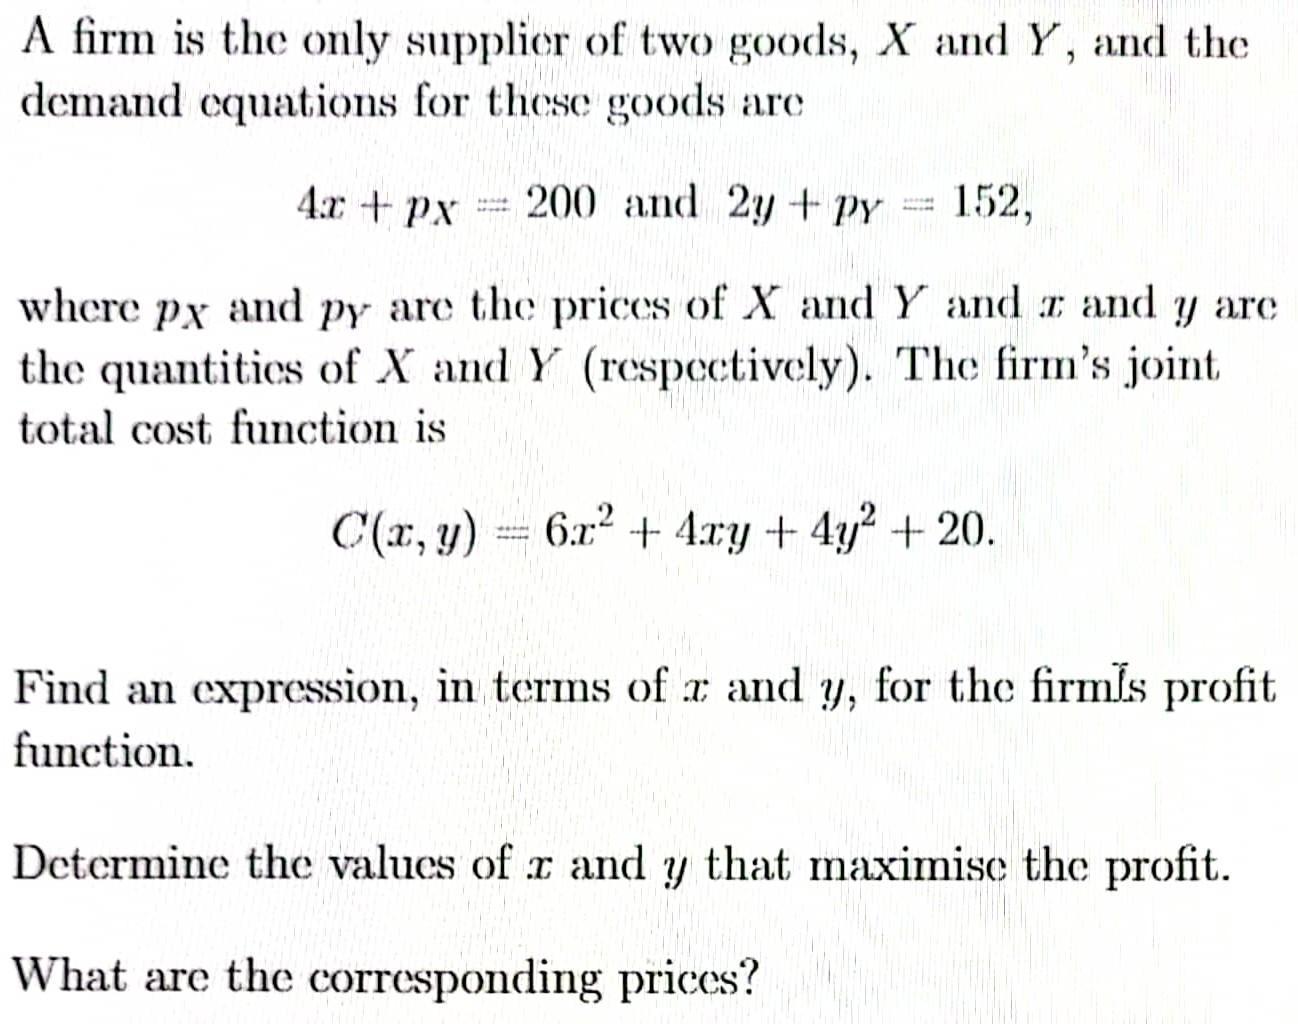 A firm is the only supplier of two goods, X and Y, and the demand equations for these goods are 4x + px = 200